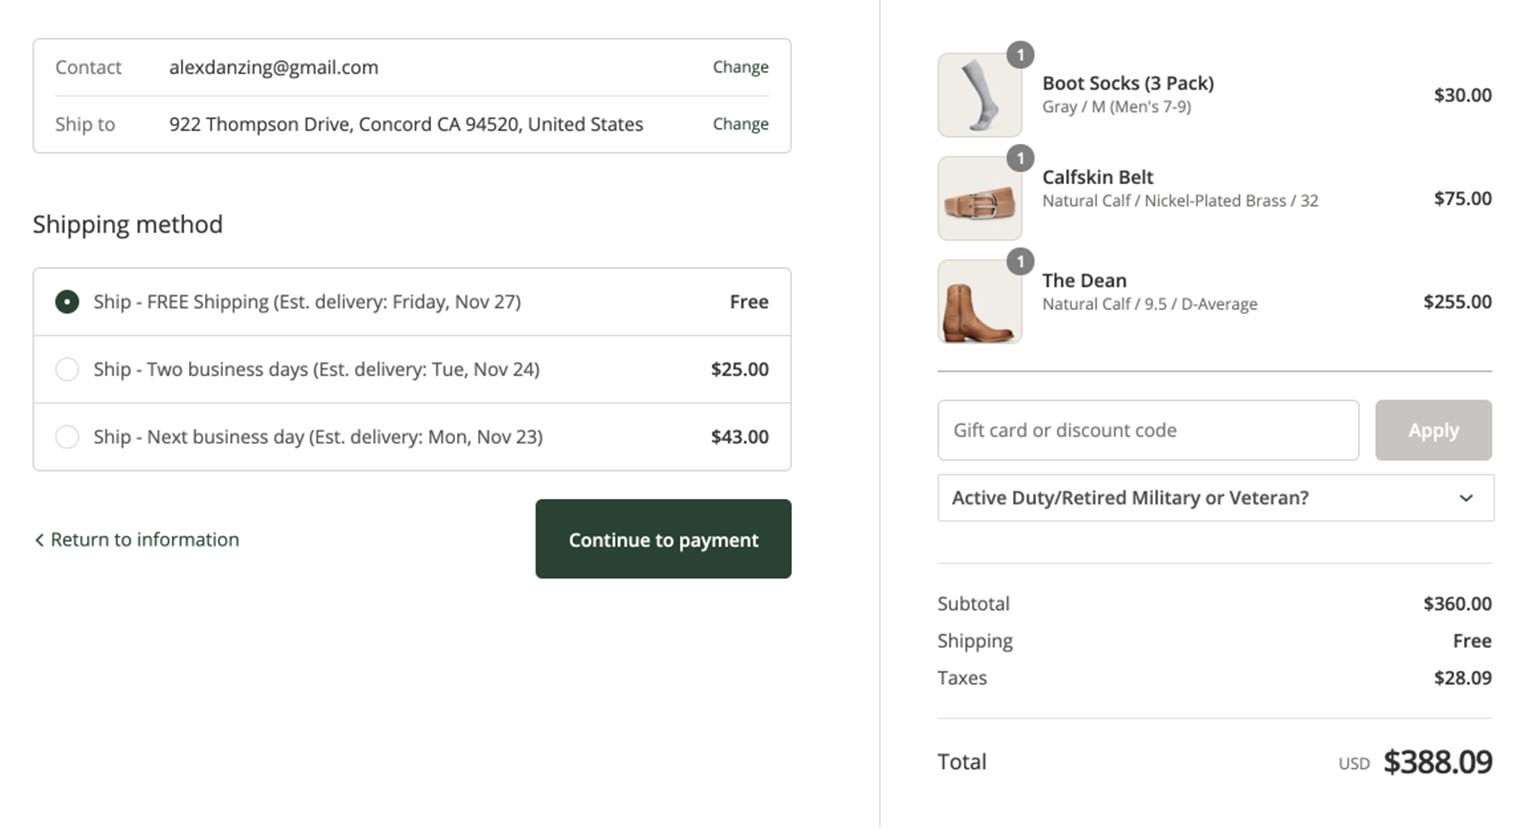 Show carrier delivery dates in real-time to increase brand loyalty